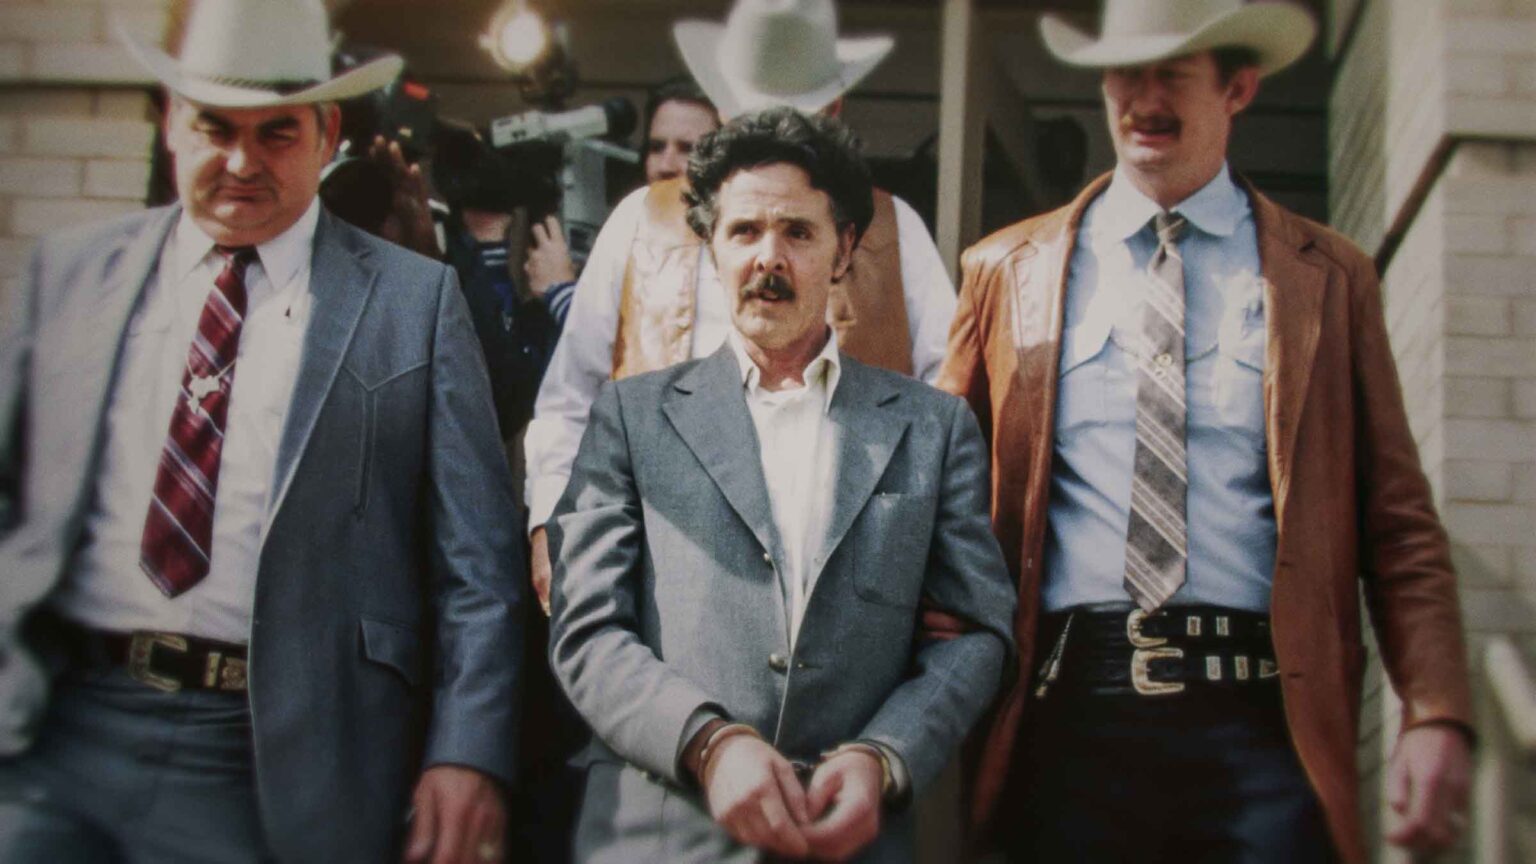 Henry Lee Lucas left the US captivated by his lies of 600+ murders. But police figured out he was just lying to gain trust and get special treatment.